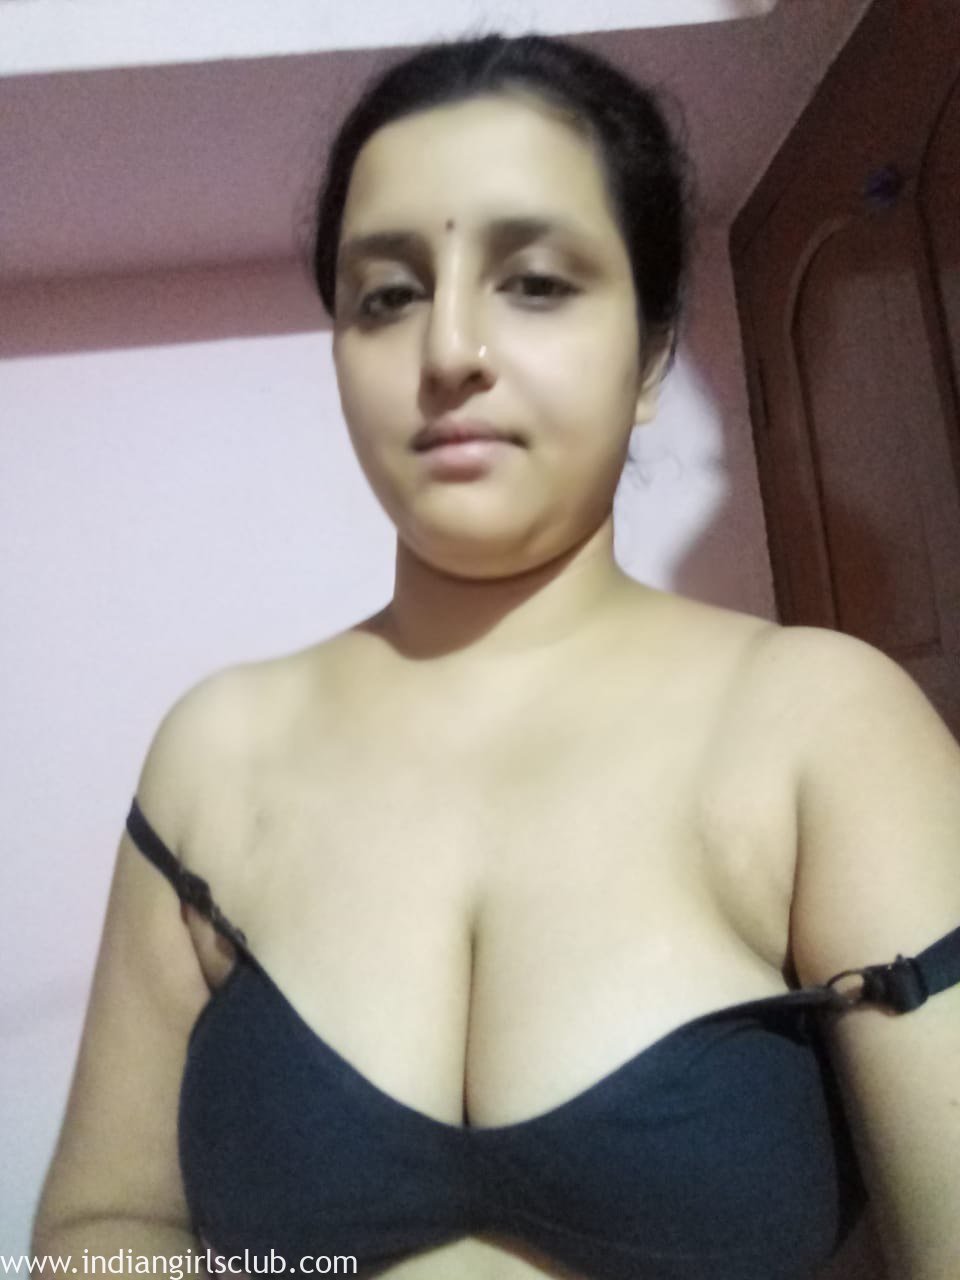 Horny Bengali Indian Housewife Ready For Hot